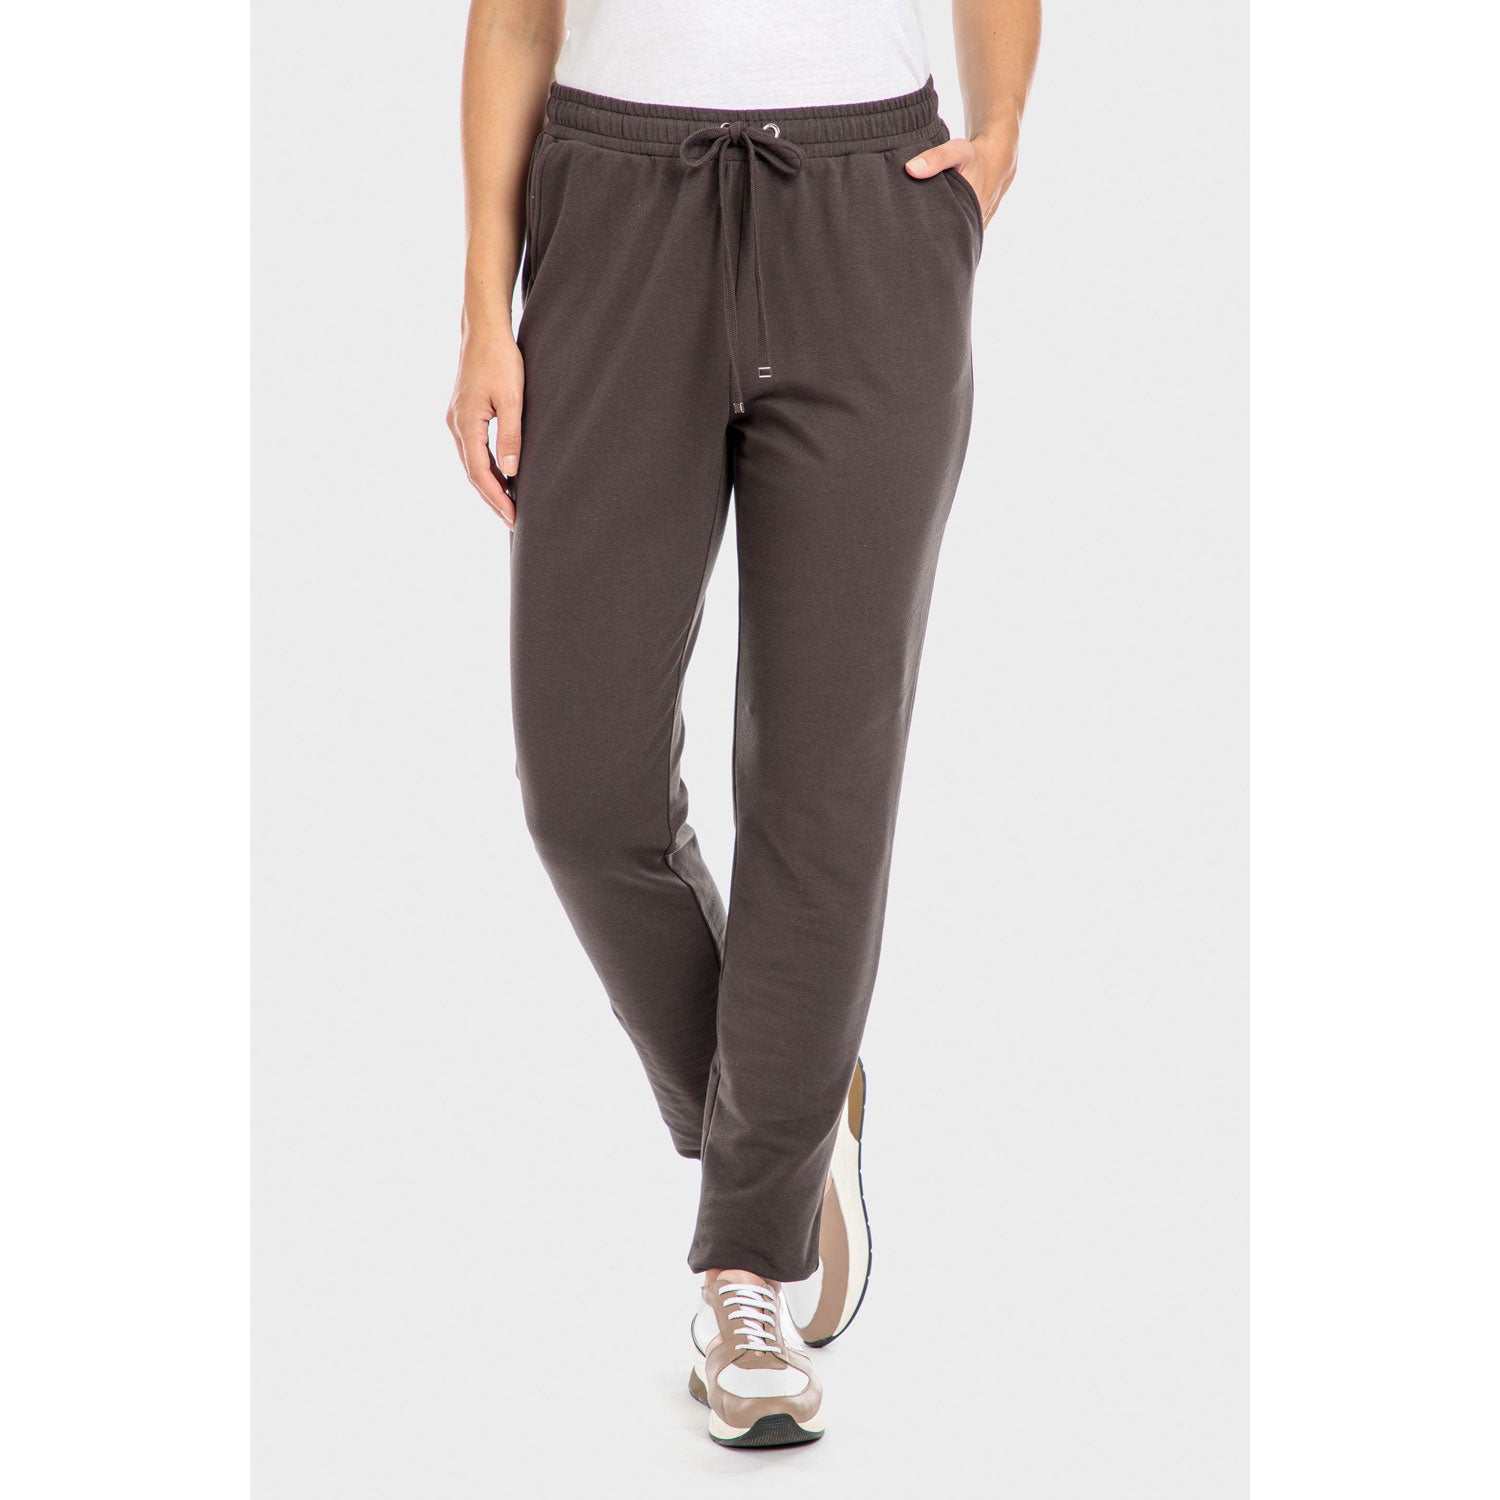 Punt Roma Casual Trousers - Brown Chocolate 1 Shaws Department Stores